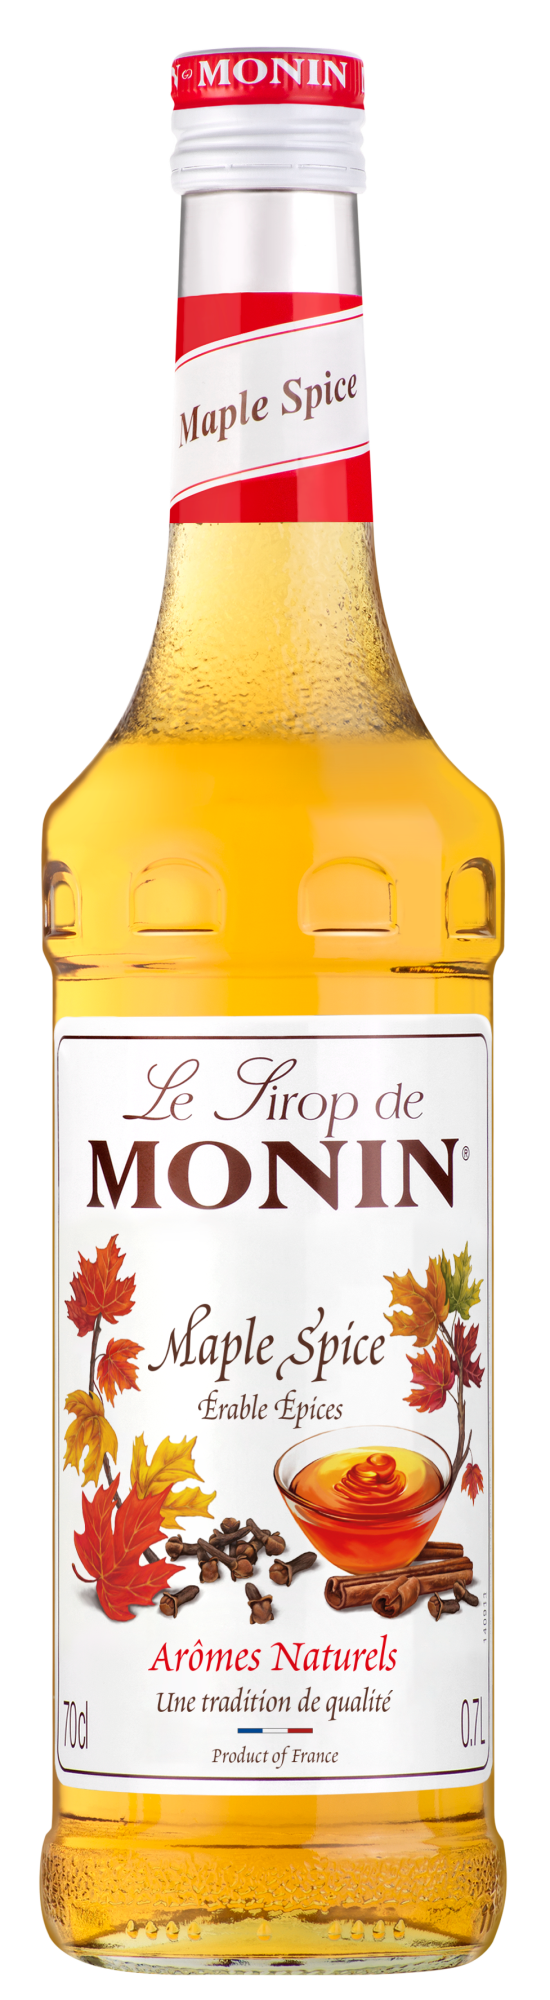 Buy MONIN Maple Spice Syrup. It offers a unique twist on the world famous Maple Syrup.